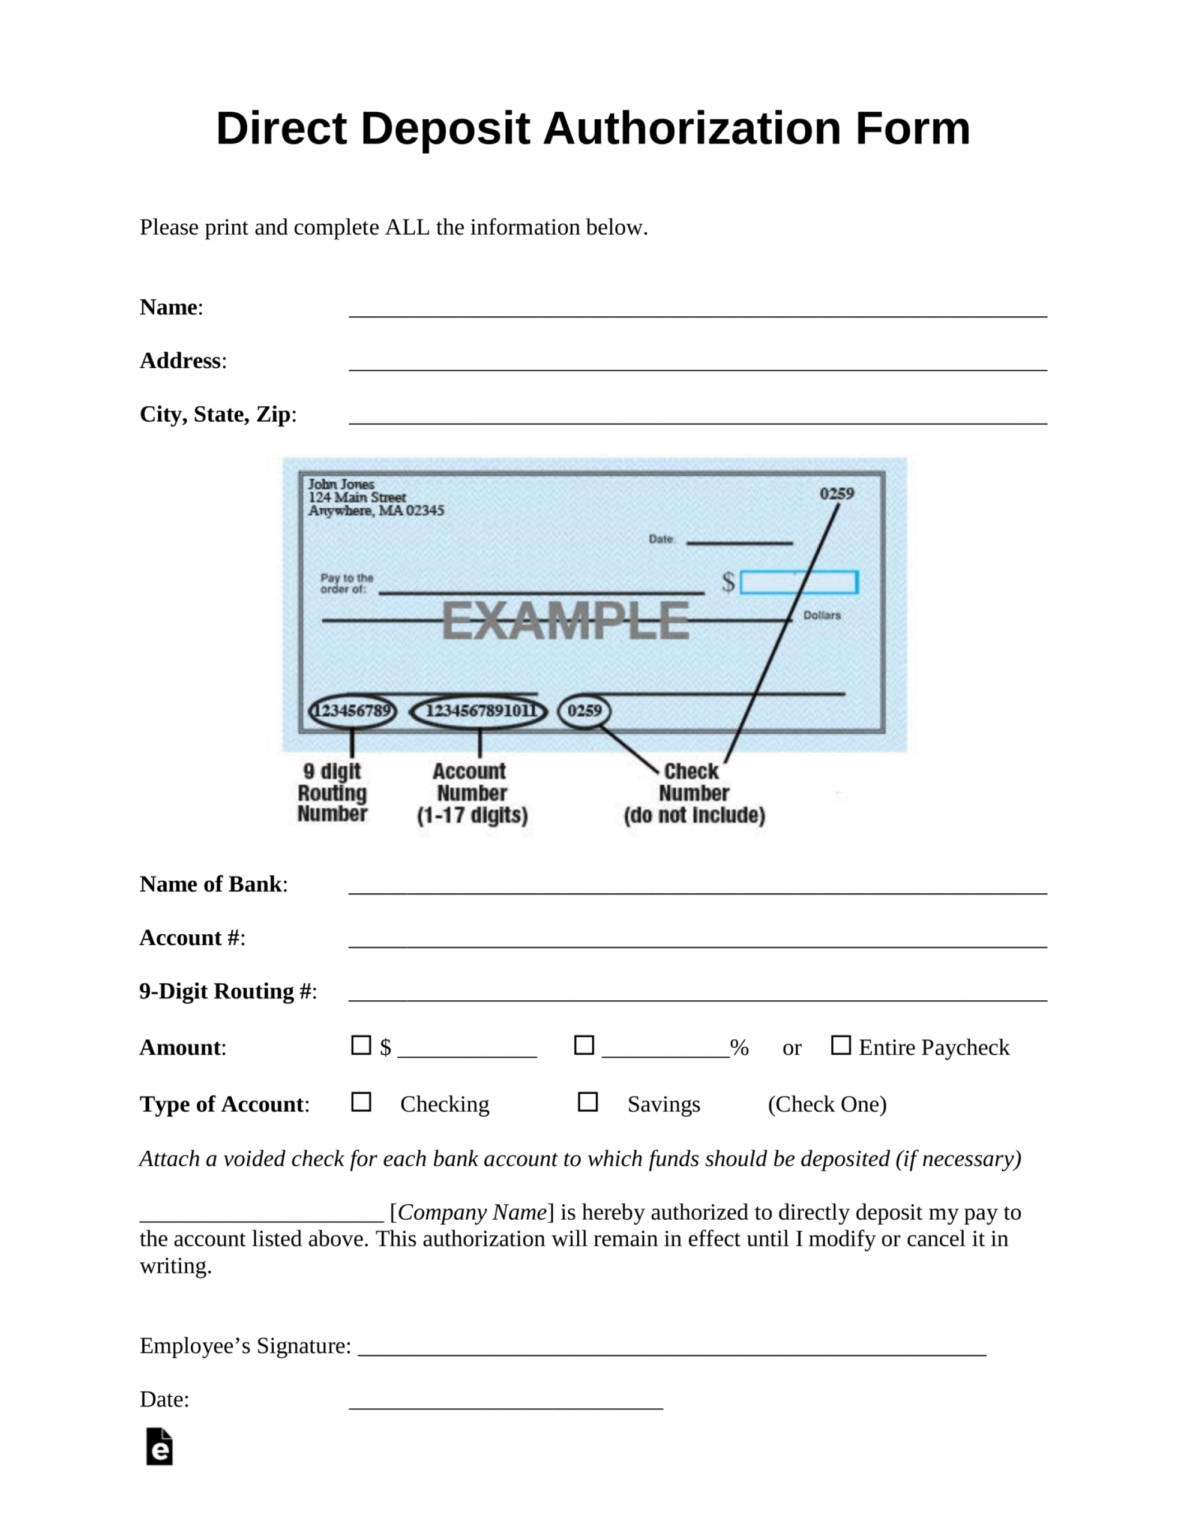 001-generic-direct-deposit-authorization-form-template-bank-direct